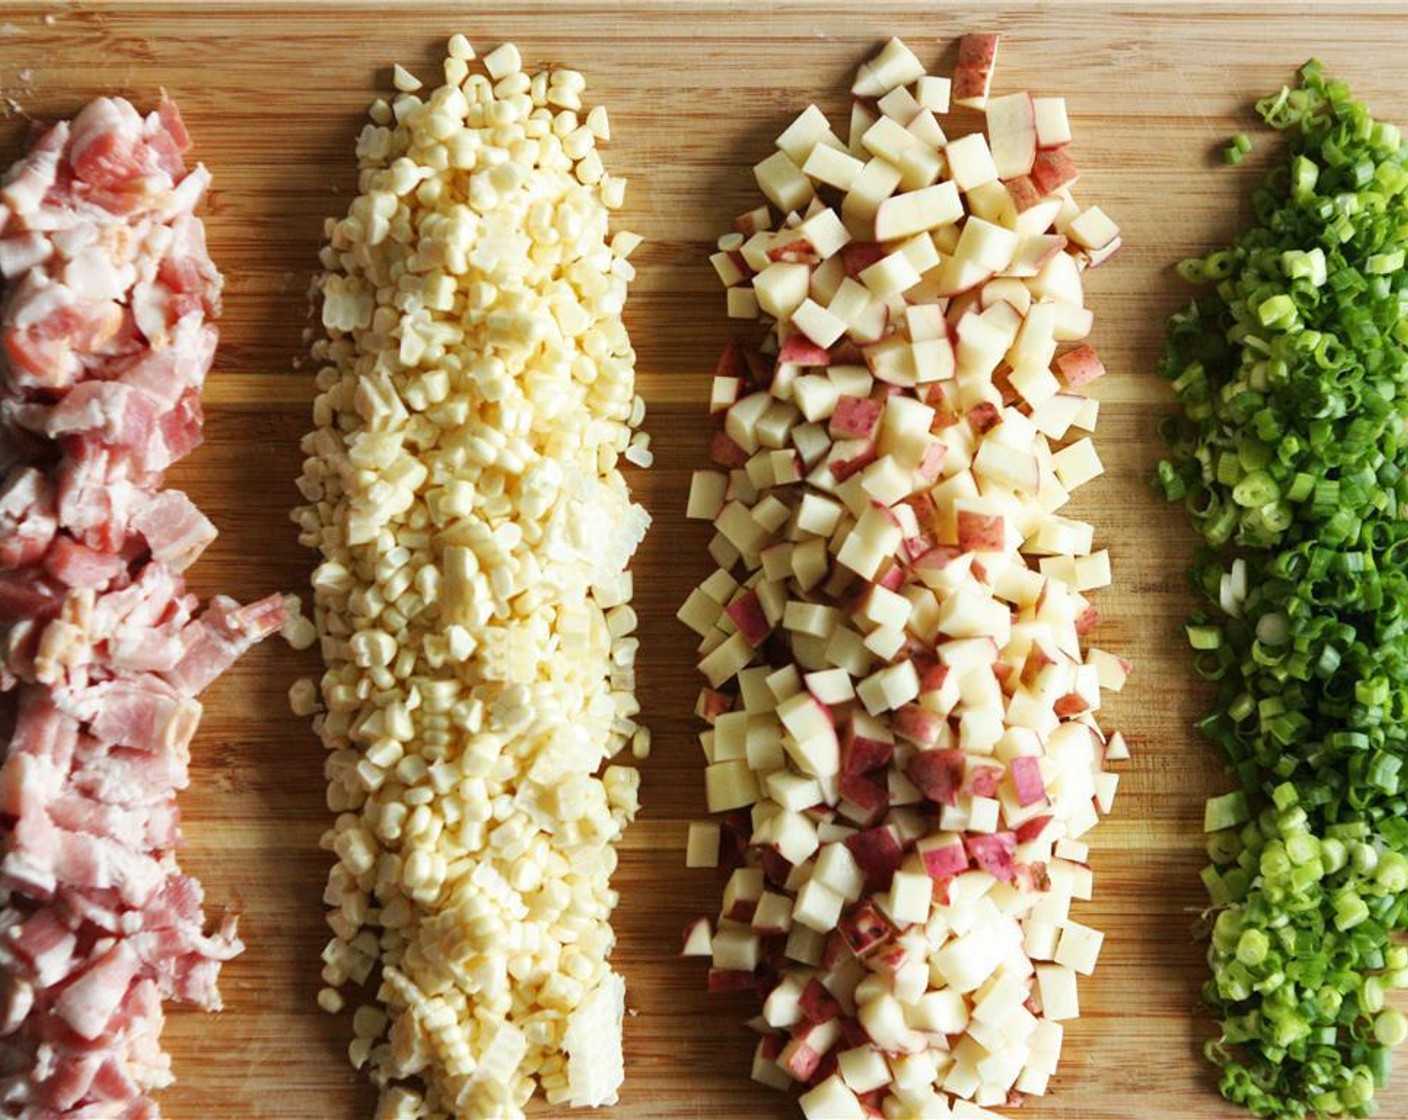 step 1 Thinly slice the Scallion (1 bunch). Cut the Red Potatoes (3 cups) into small cubes. Cut the kernels from the Corn (2 ears). Dice the Thick-Cut Bacon (6 slices).